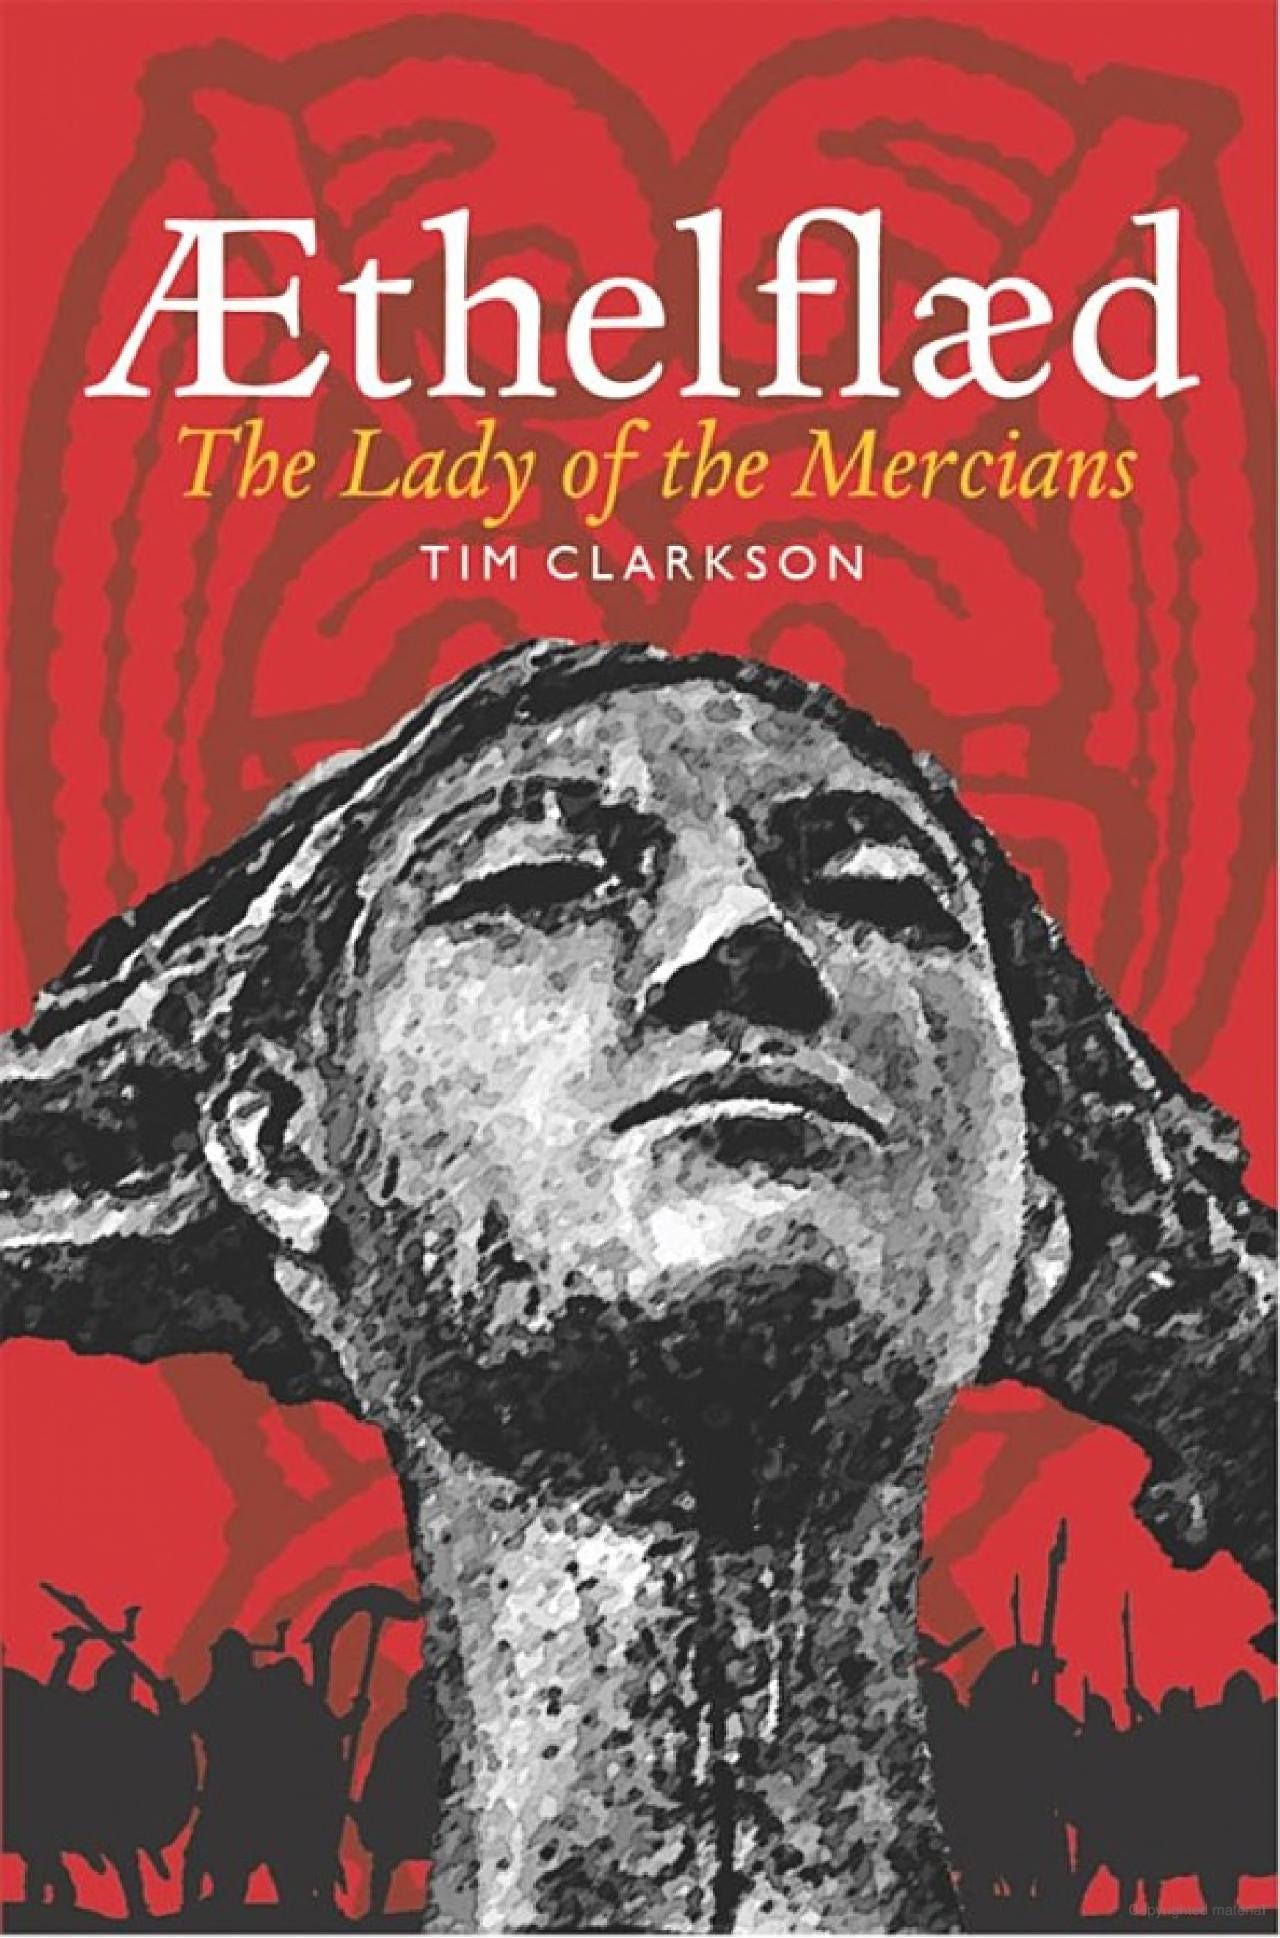 The cover of Tim Clarkson's "Æthelflæd: The Lady of the Mercians". A greyscale head of a statue overlays a red background and black silhouettes of an army.